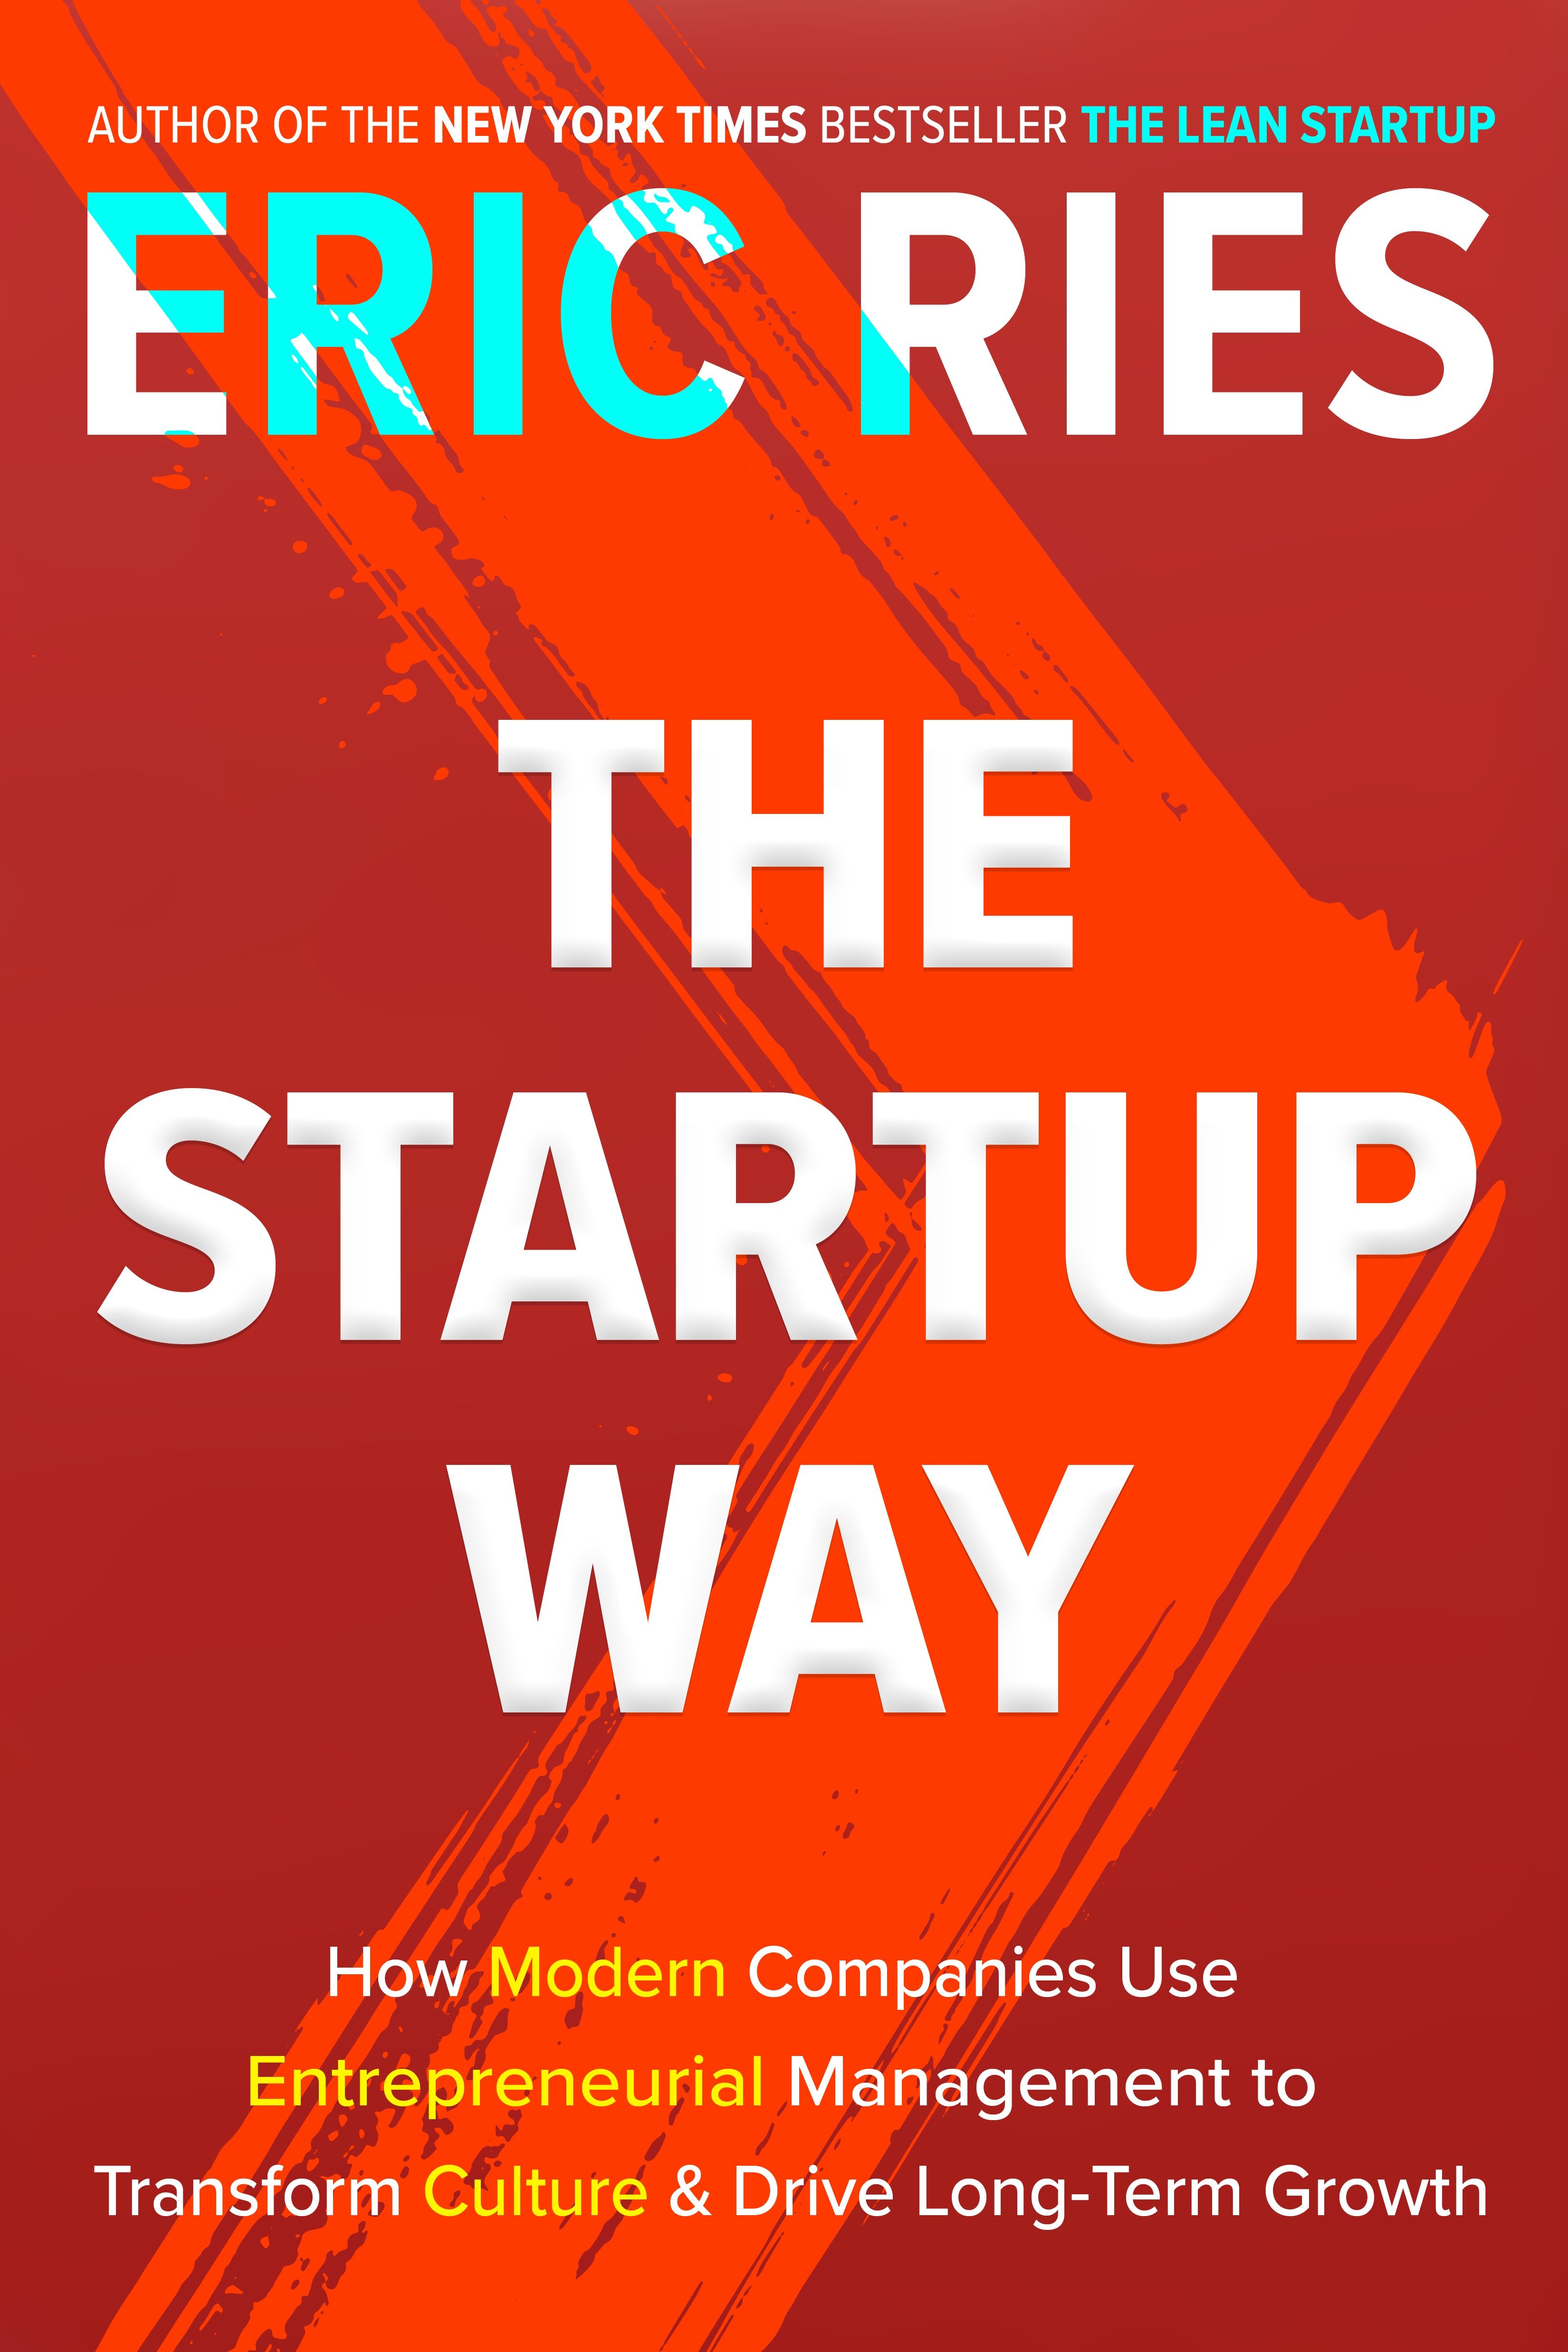 The Startup Way (Hardcover Book)